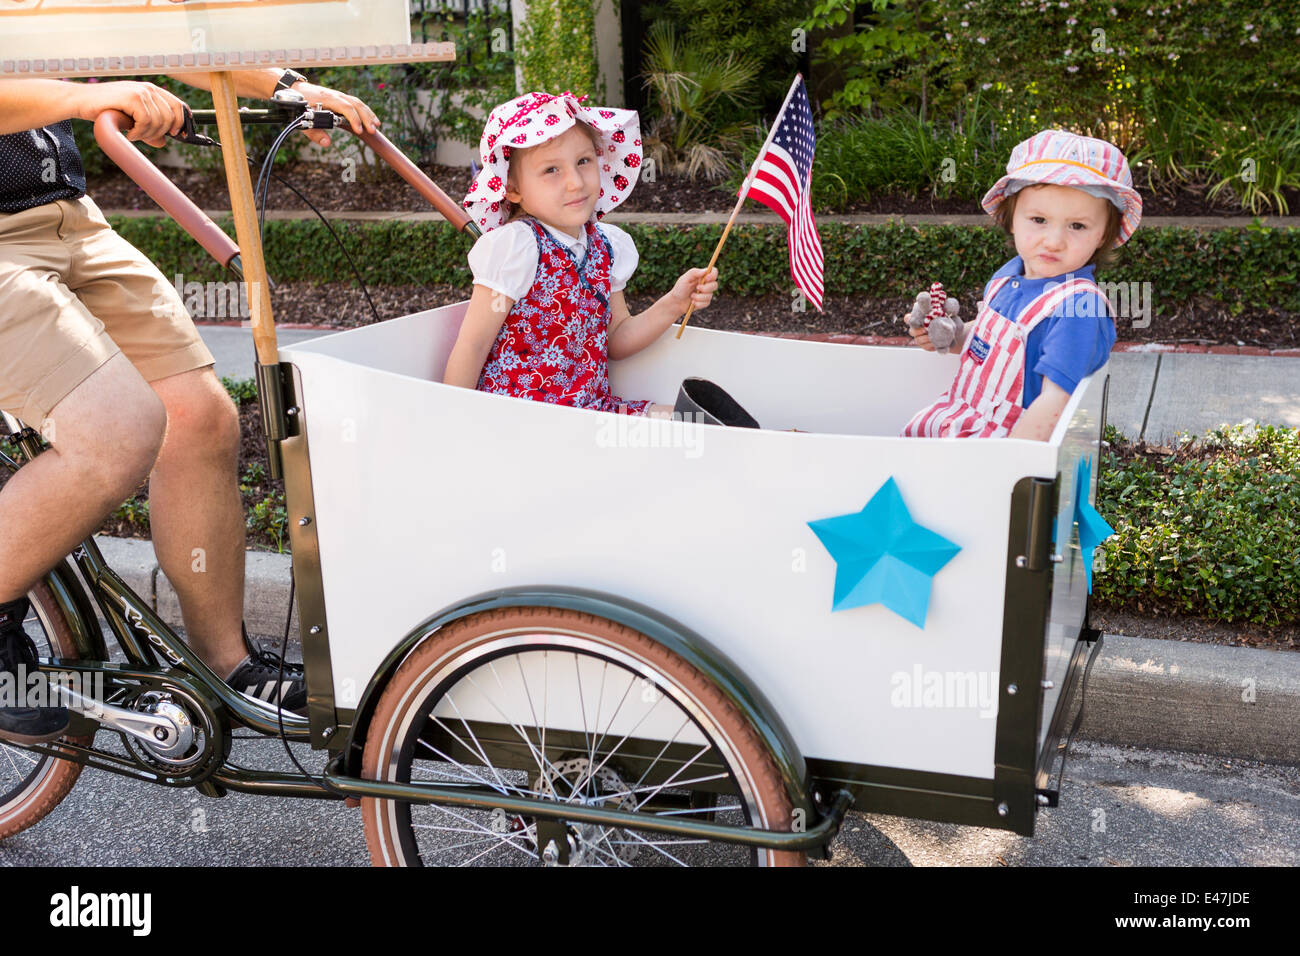 A young family dressed in patriotic costume ride in a bike cart during the I'On community Independence Day parade July 4, 2014 in Mt Pleasant, South Carolina. Stock Photo